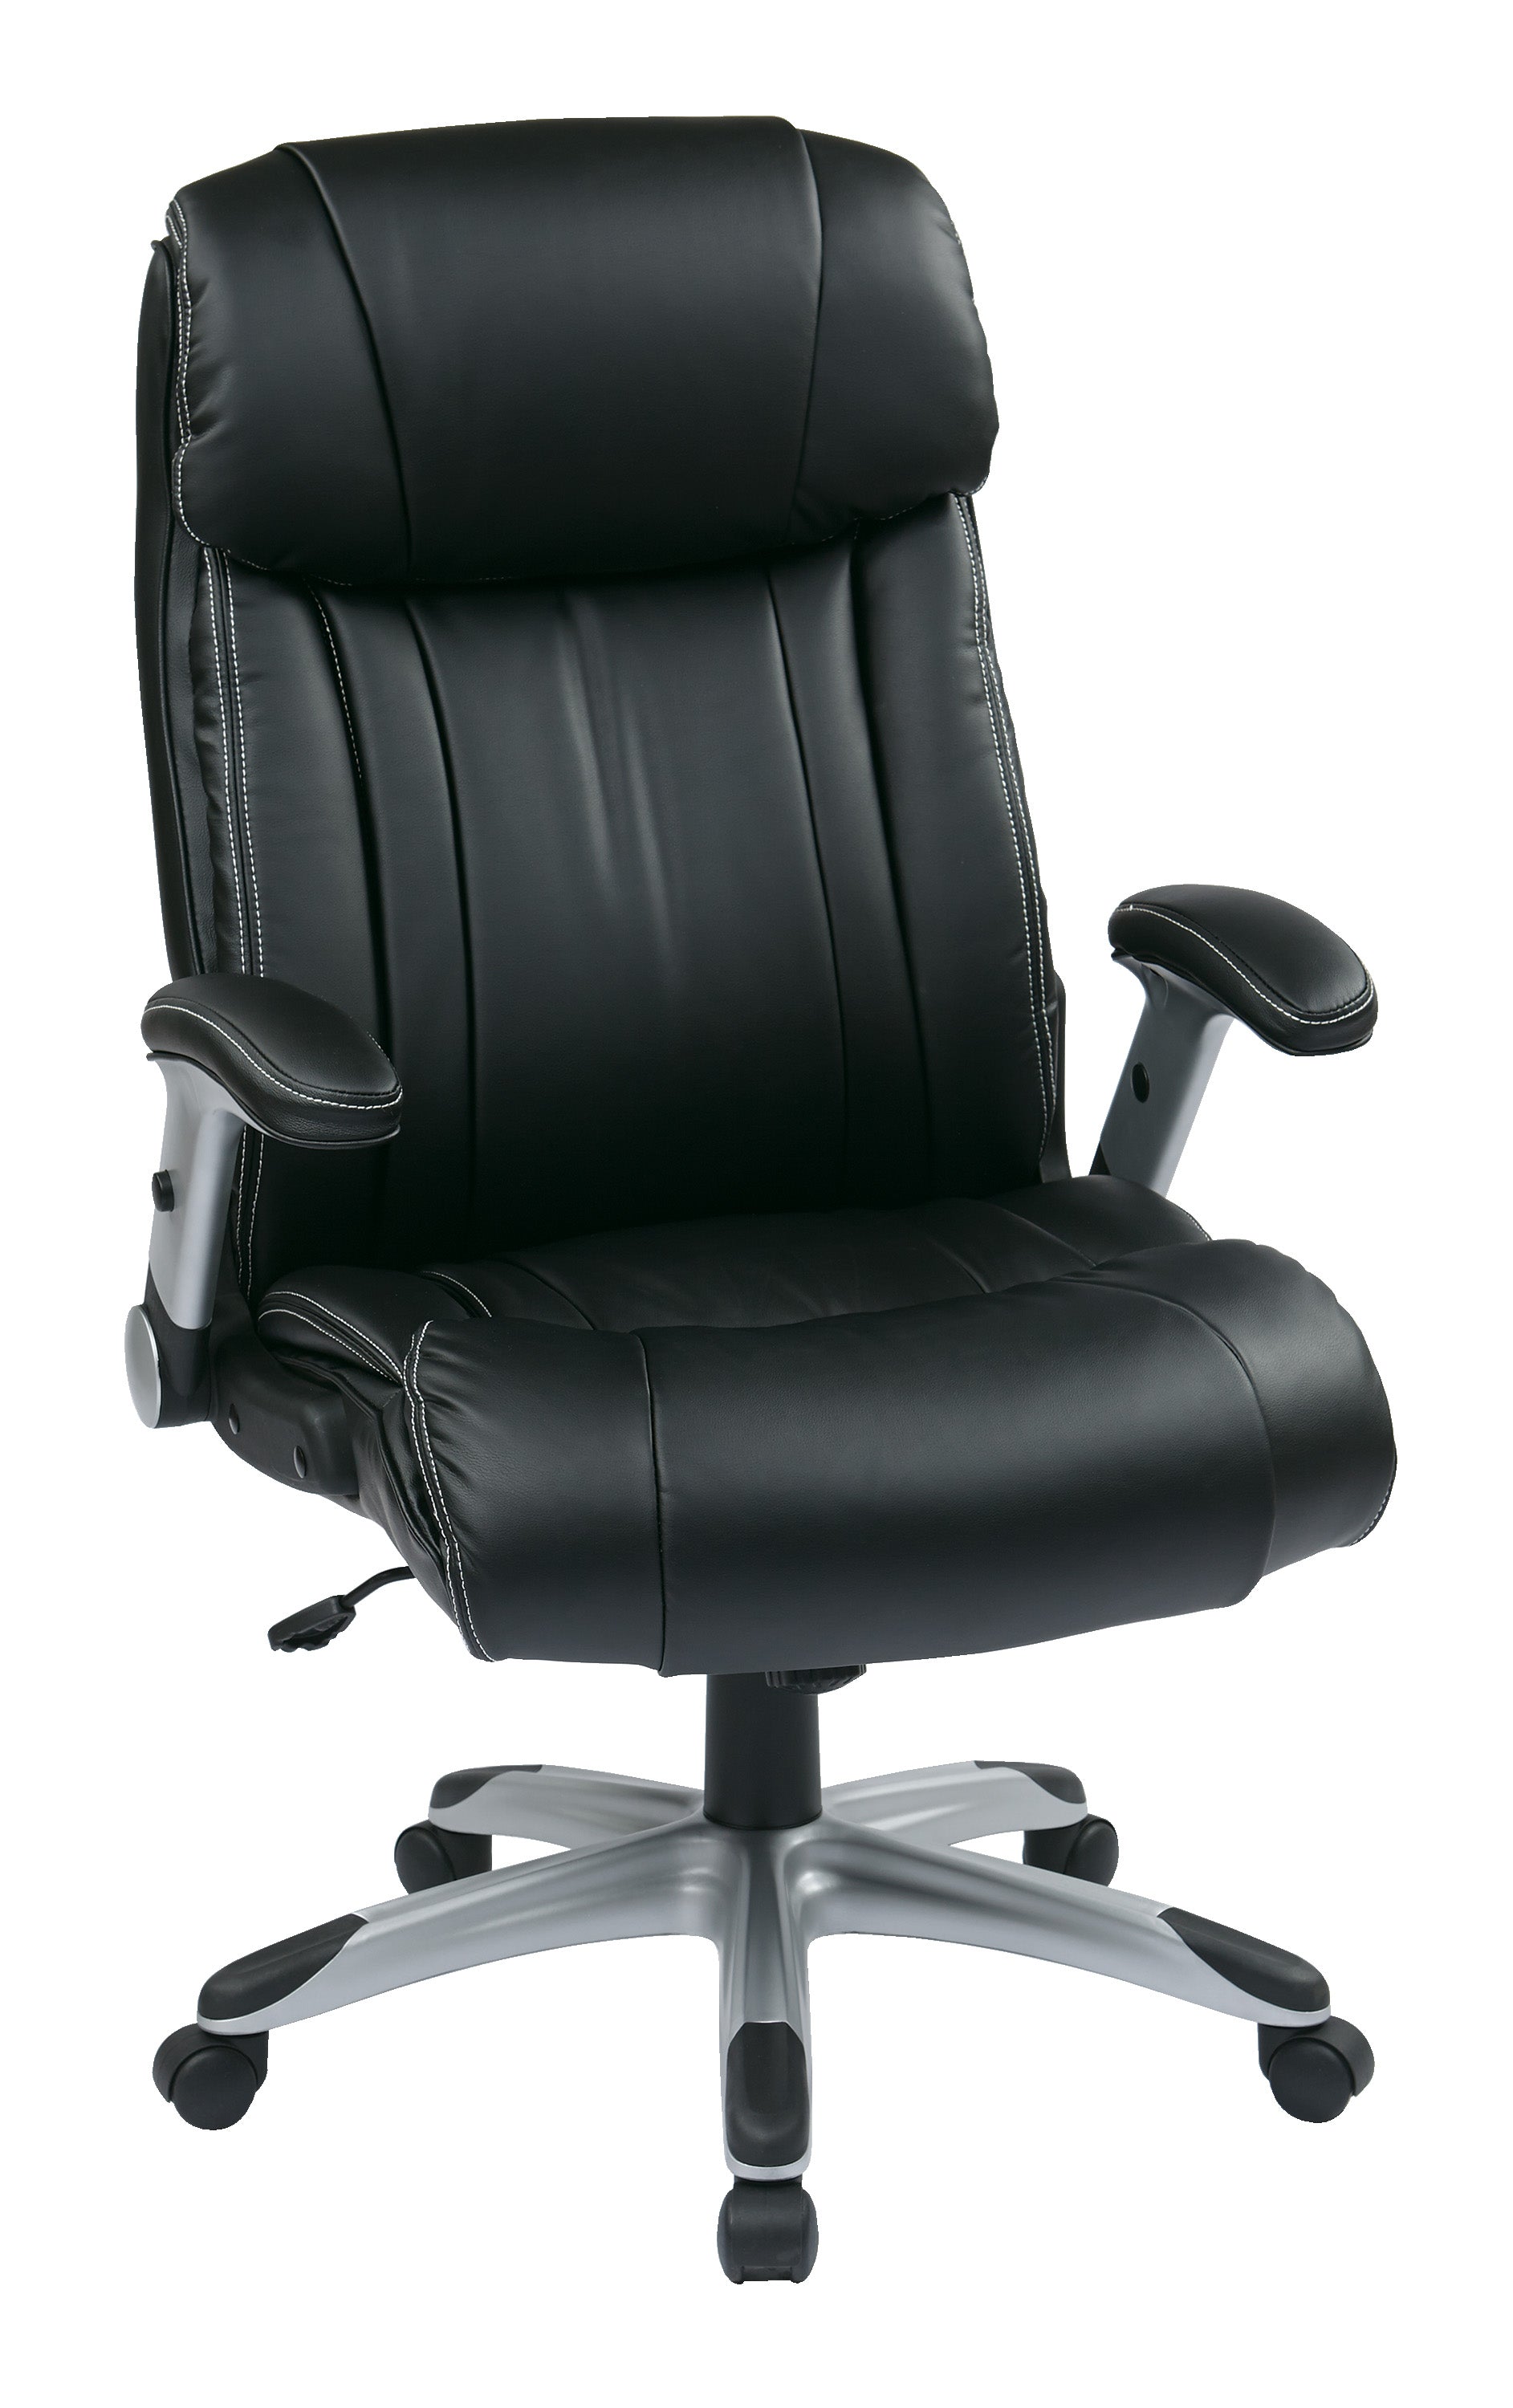 ECH38665A - Executive Bonded Leather Chair, Adjustable Padded Flip Arms by OSP